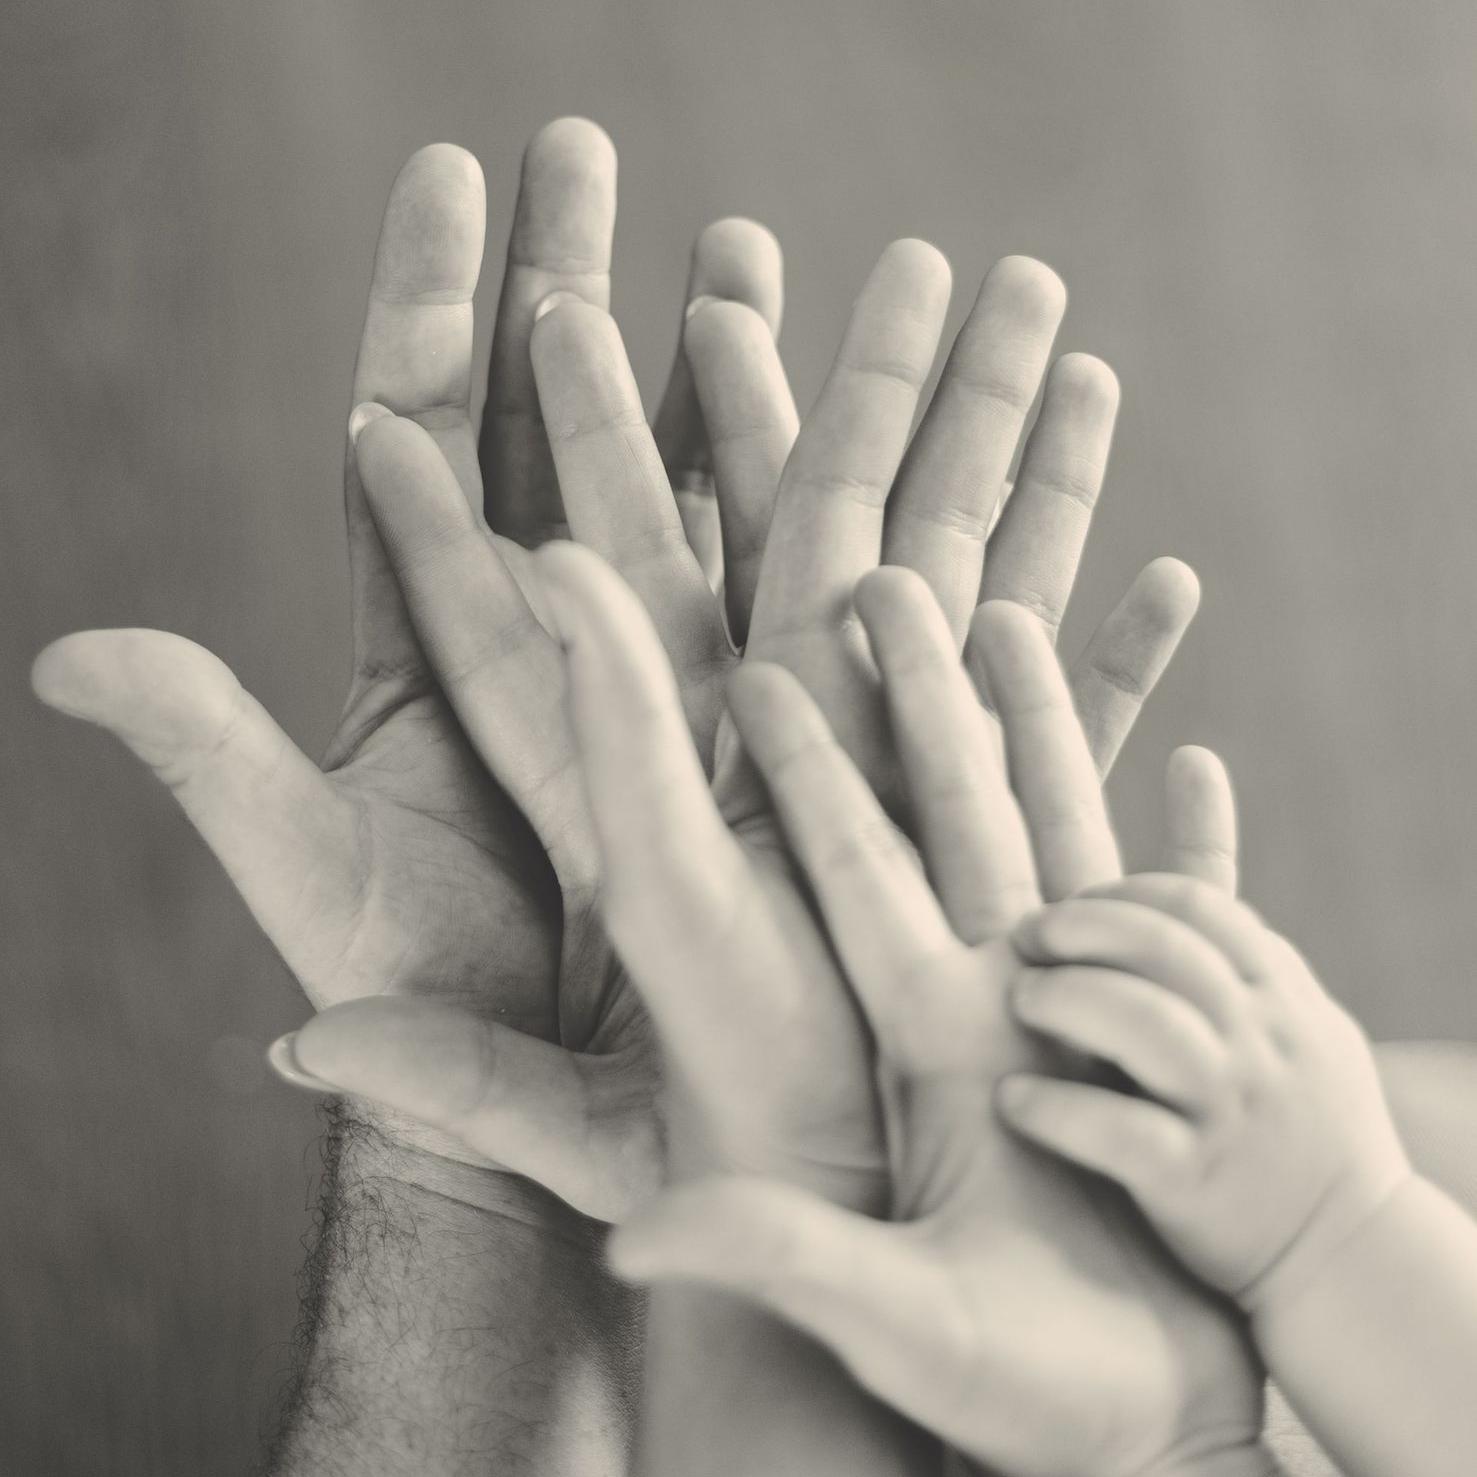 grayscale photo of family's hands